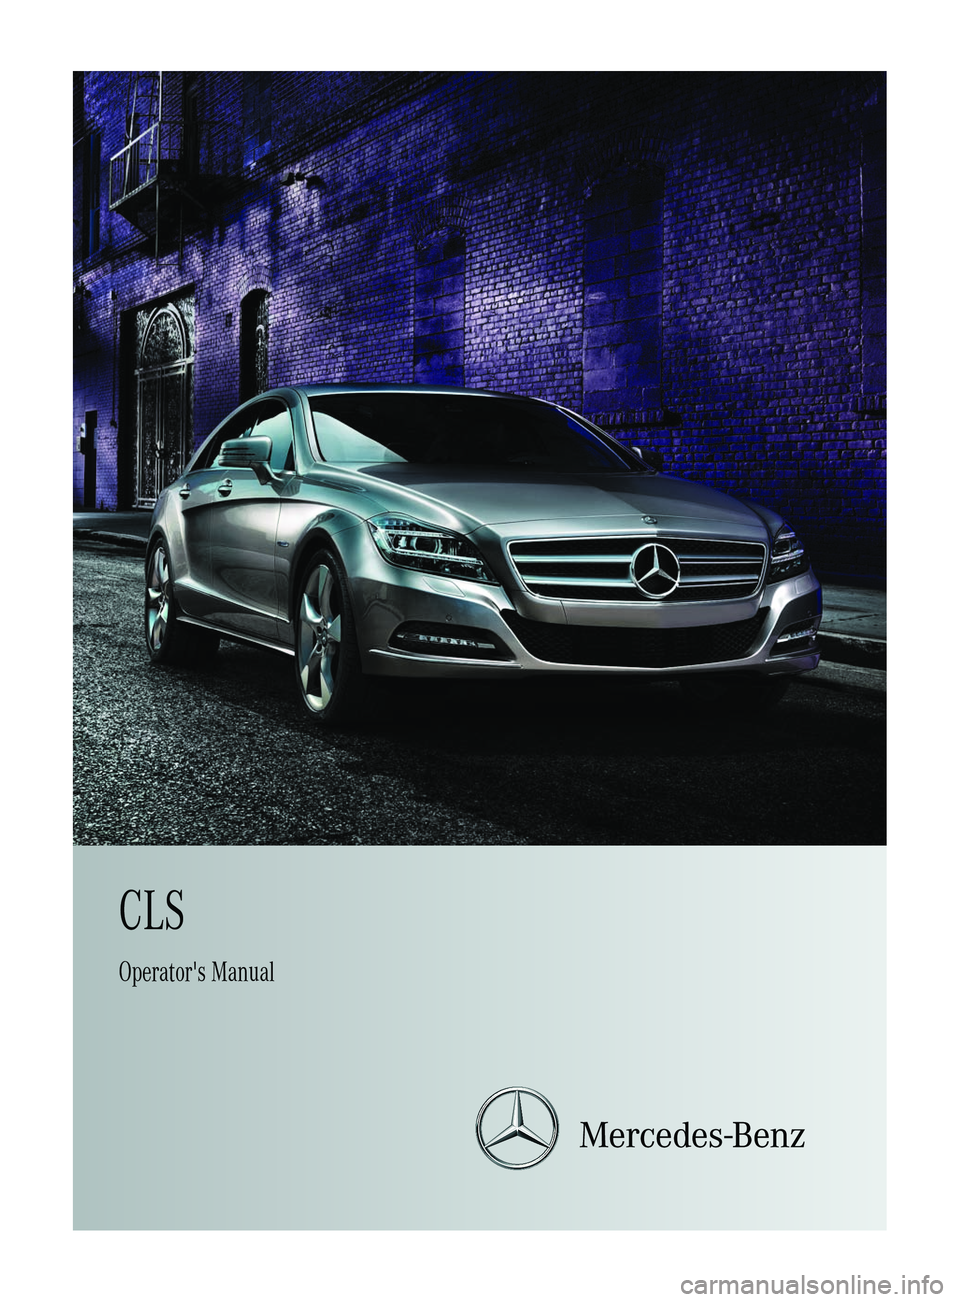 MERCEDES-BENZ CLS 2012  Owners Manual CLSOperator's Manual    